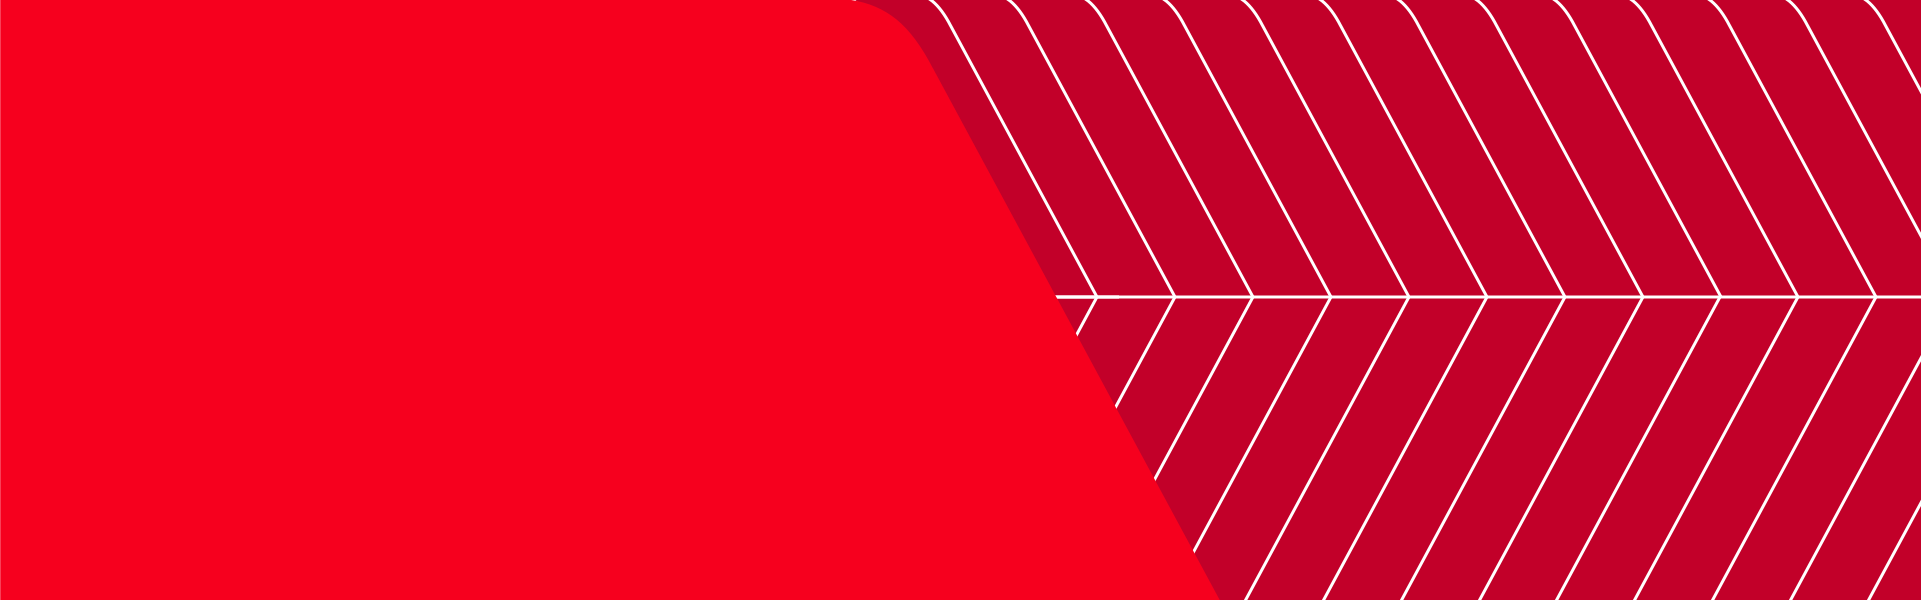 Horizontal red graphic with a white arrow pattern at far right.